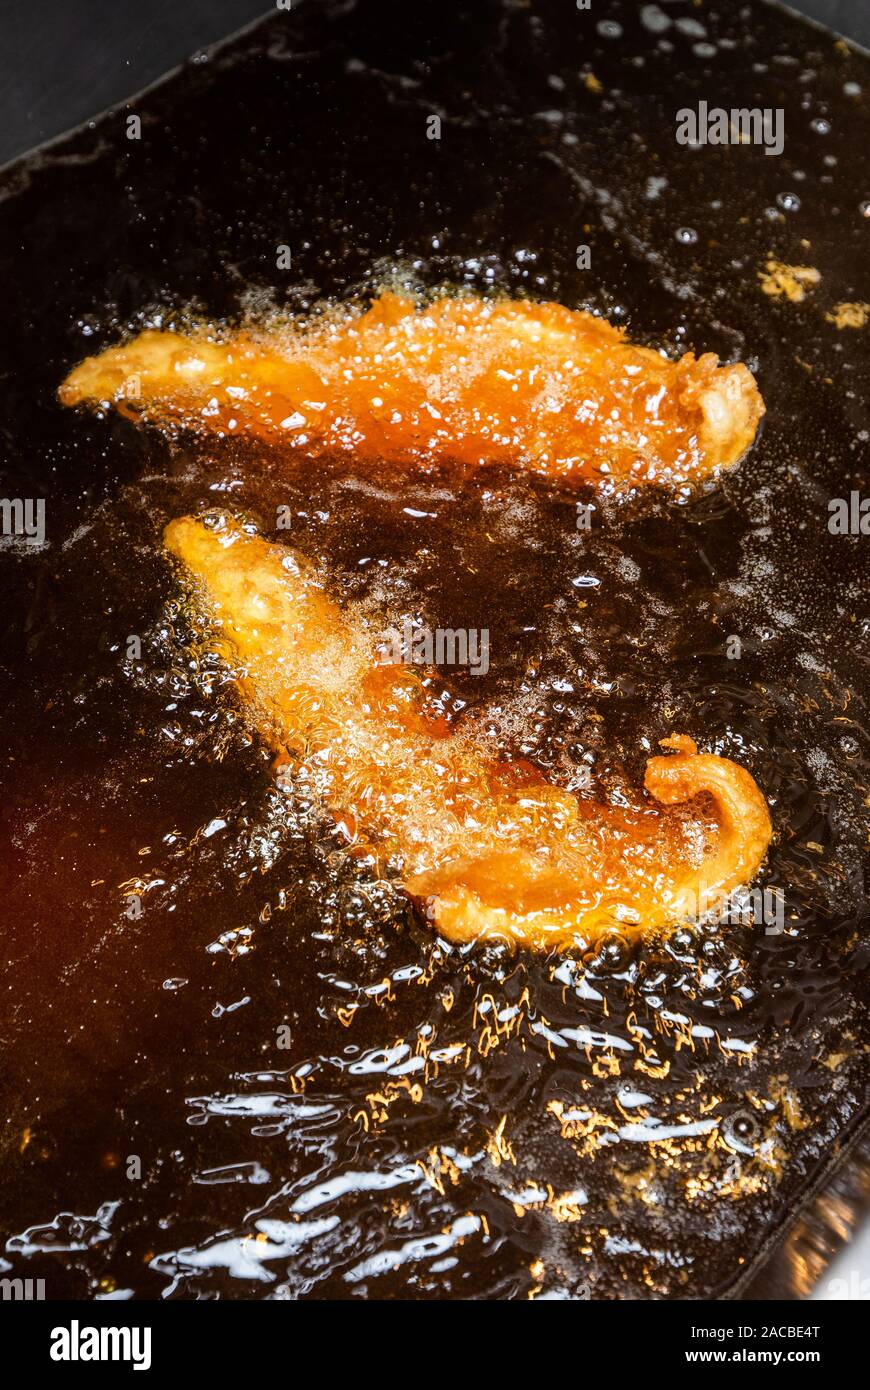 https://c8.alamy.com/comp/2ACBE4T/fish-cooking-in-a-deep-fat-fryer-in-a-fish-and-chip-shop-in-the-united-kingdom-2ACBE4T.jpg